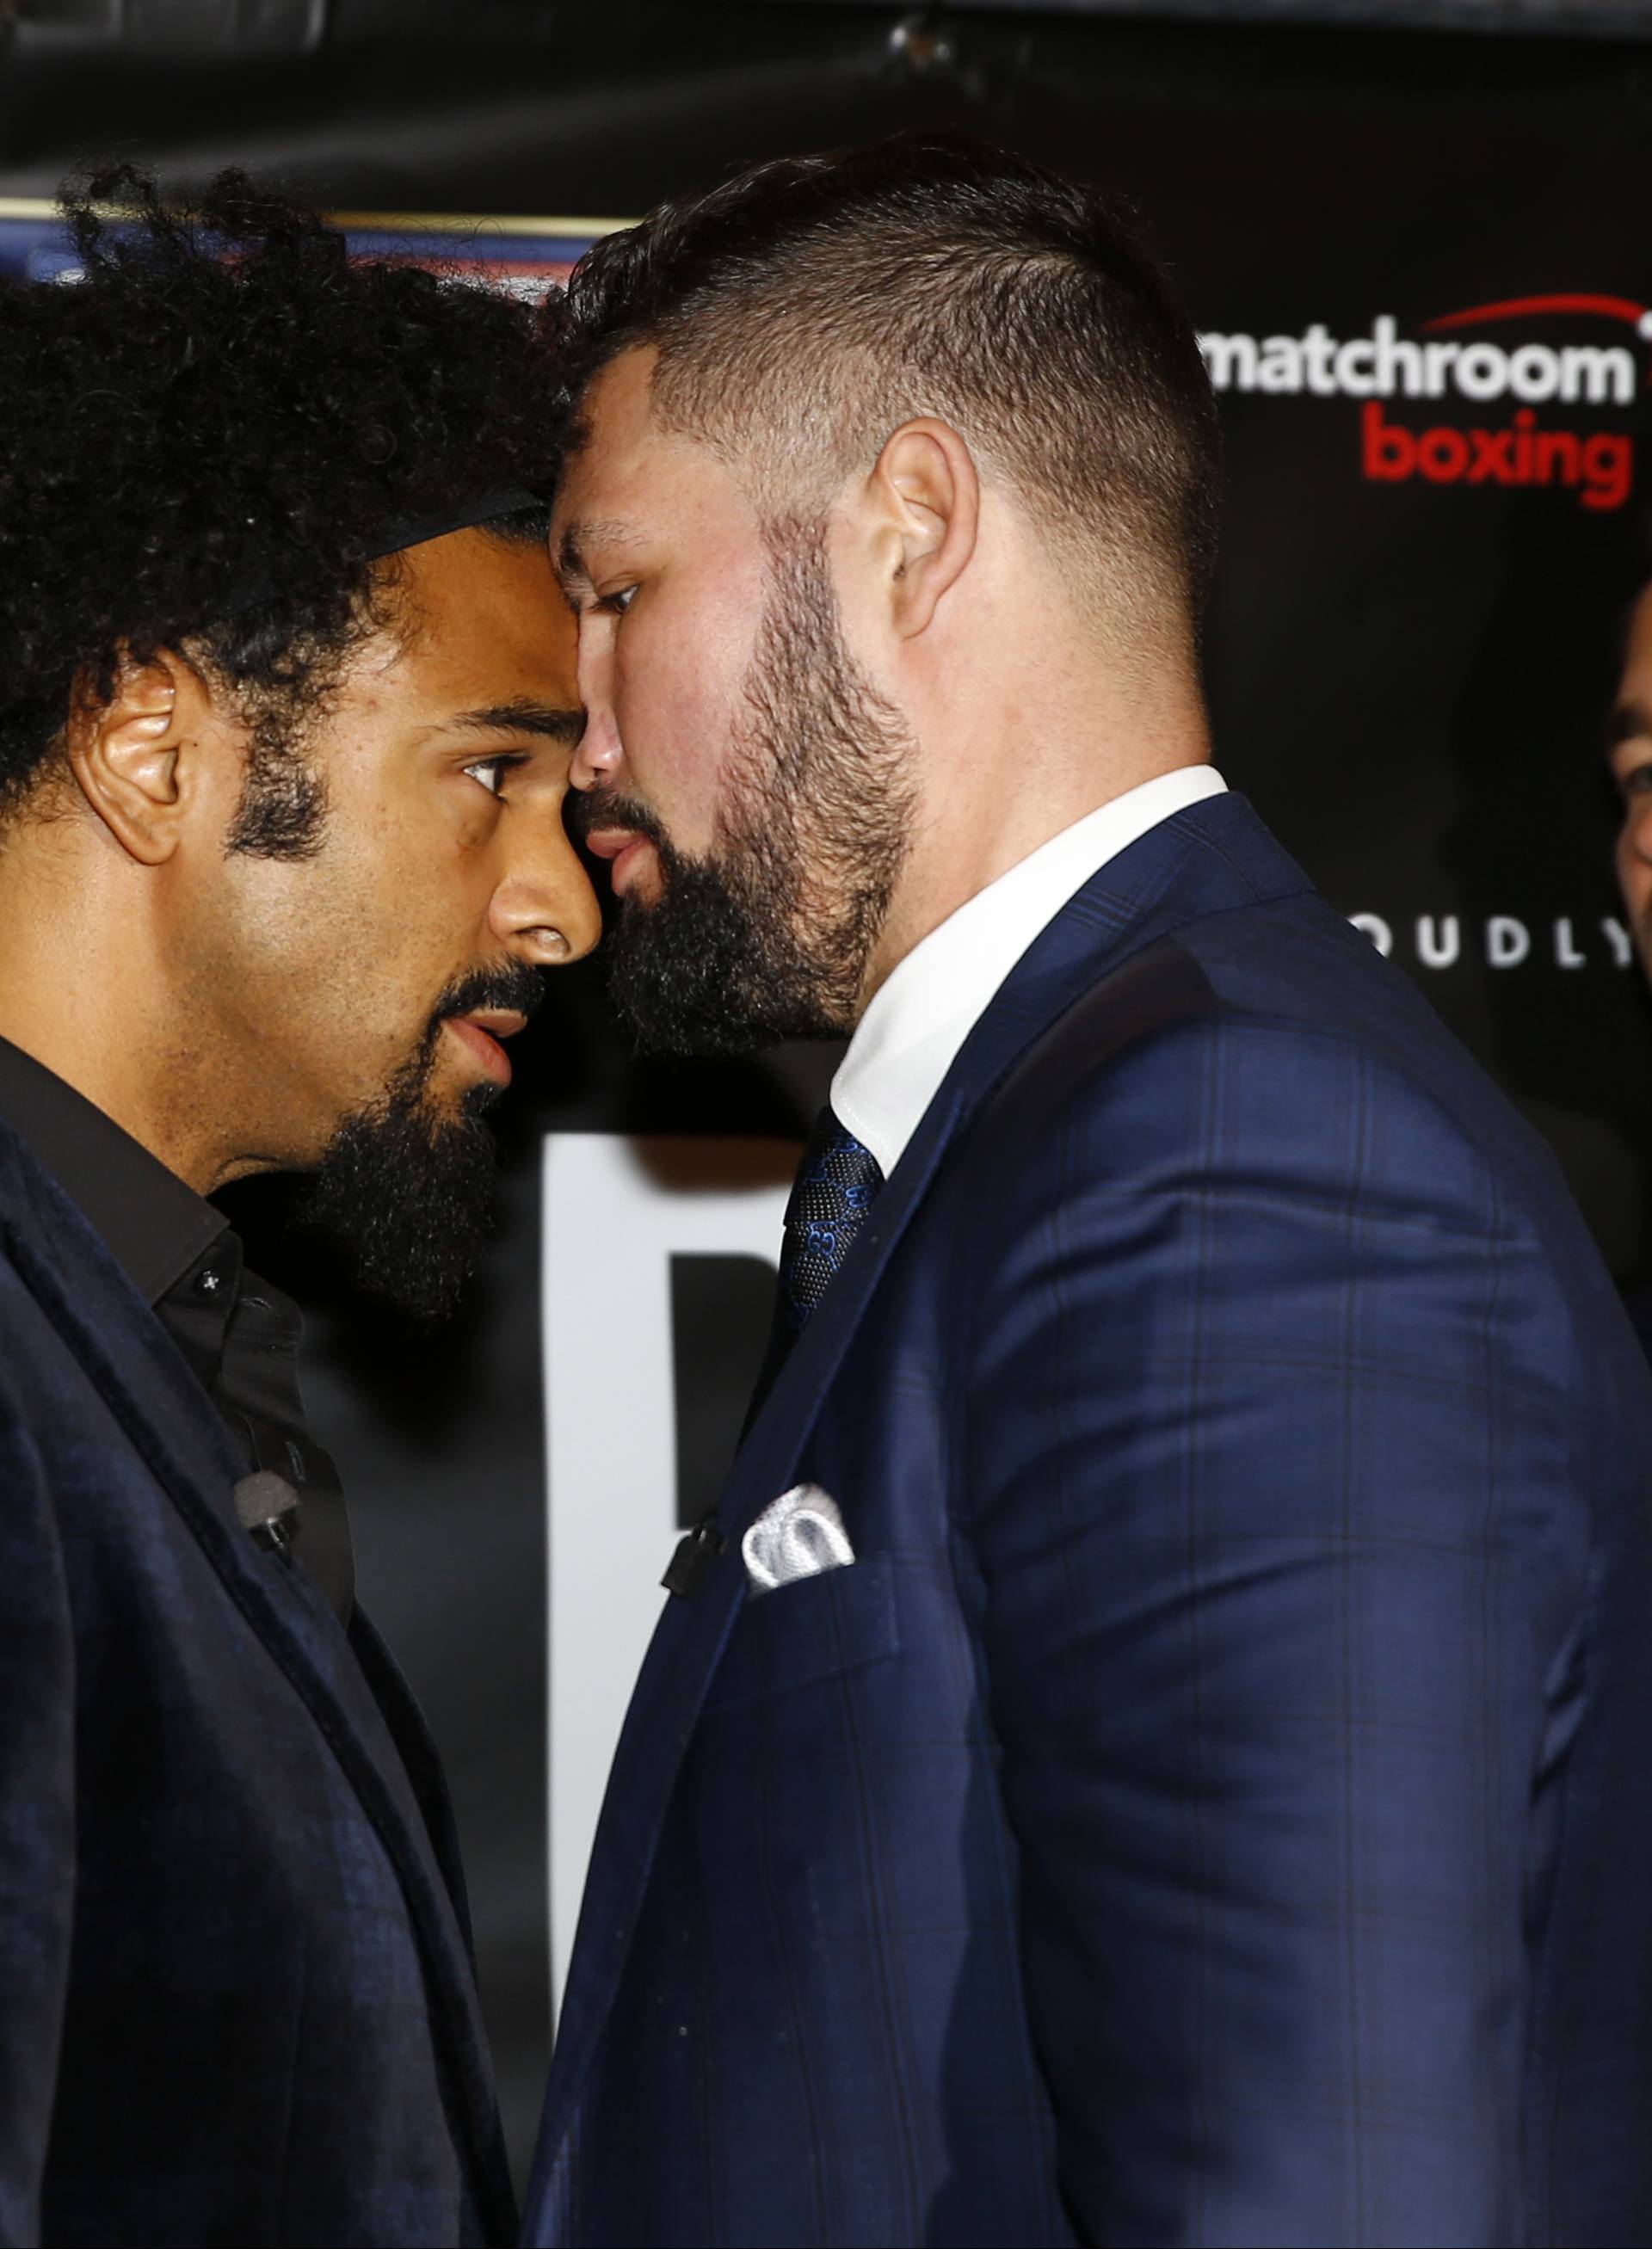 David Haye and Tony Bellew go head to head after the press conference as promoter Eddie Hearn looks on